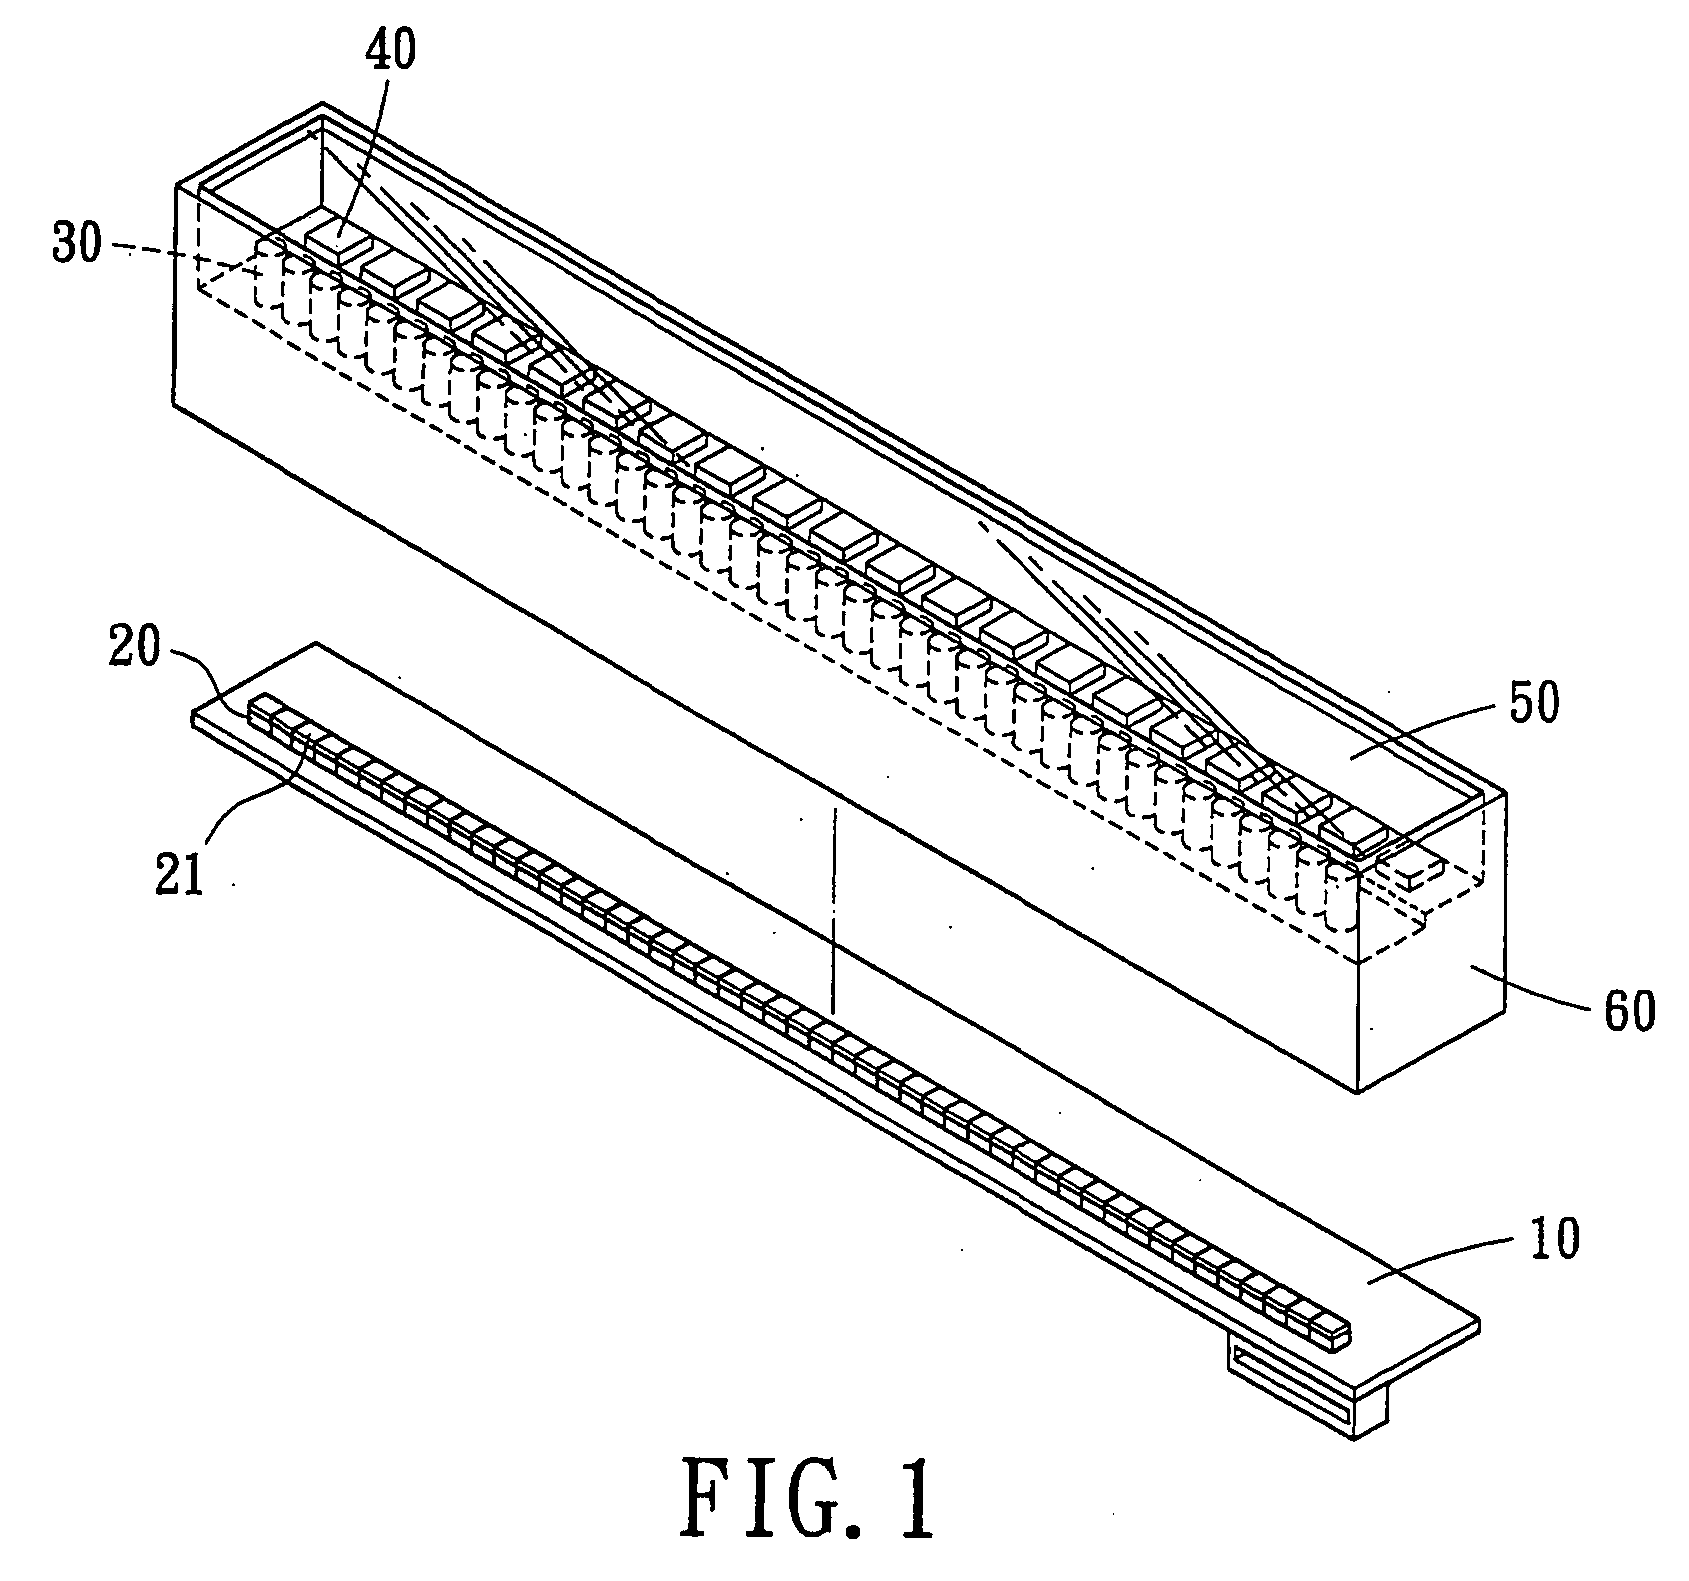 Image-sensing module using white LEDs as a light source thereof